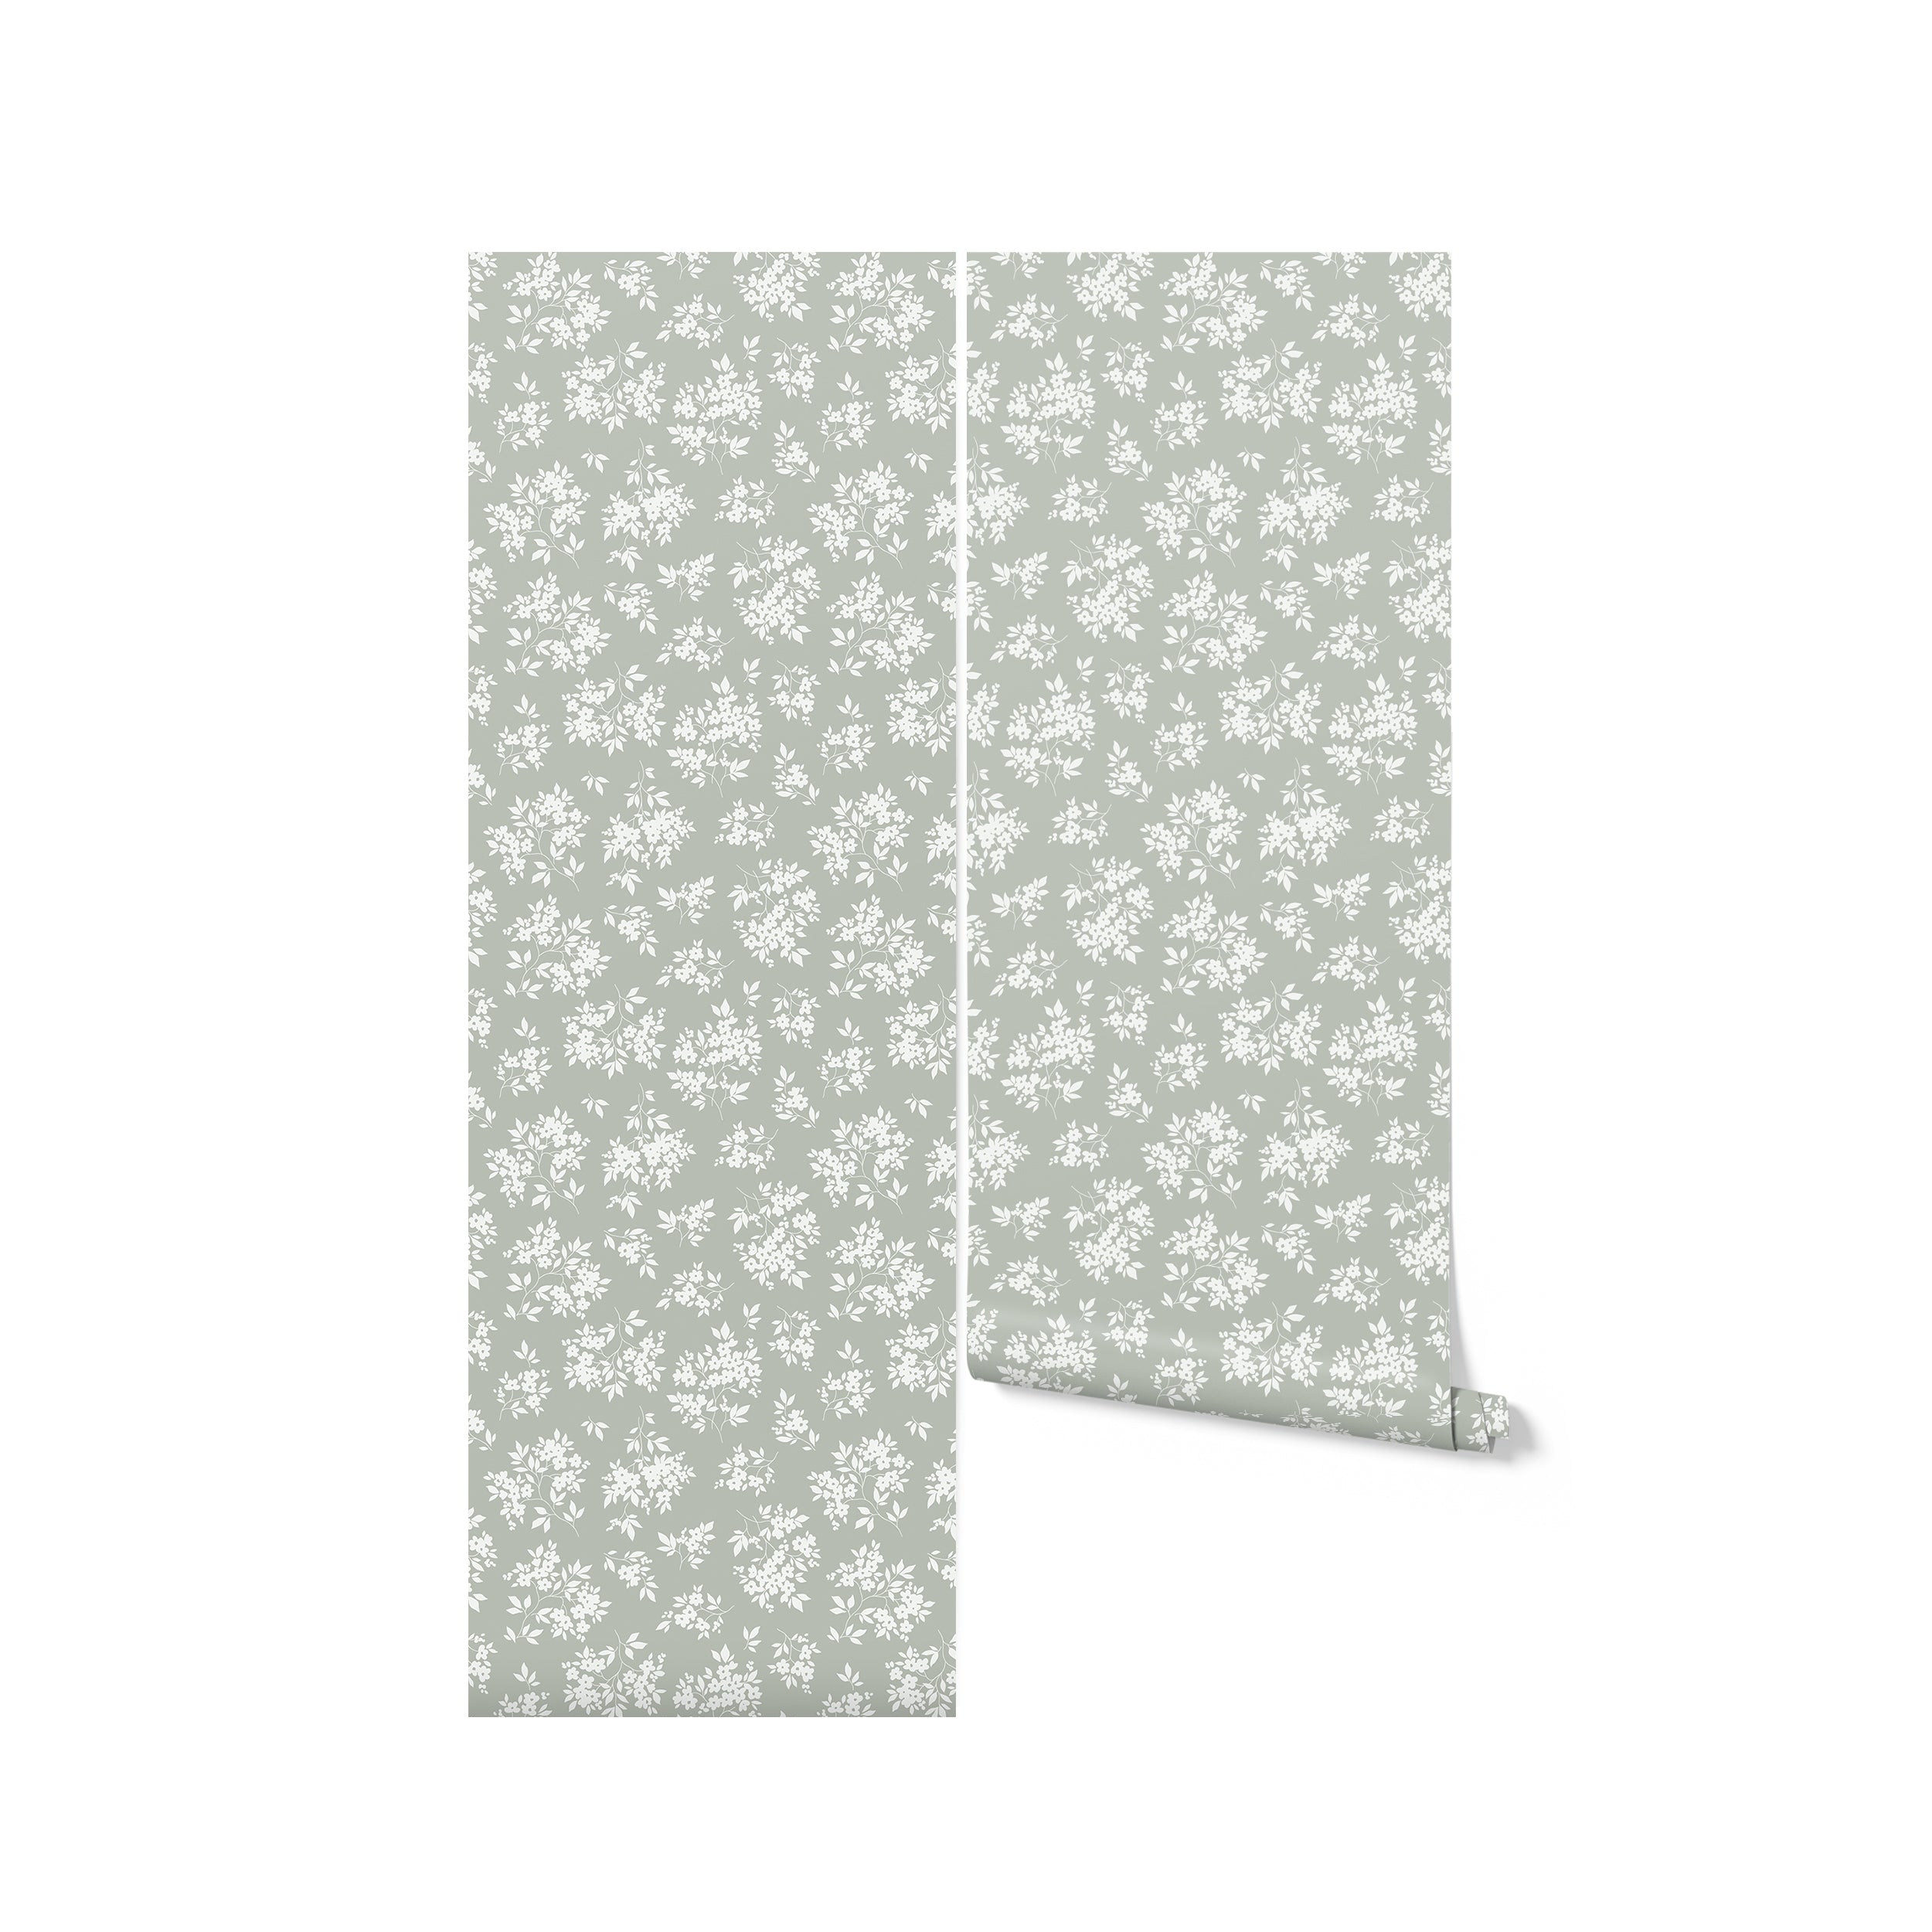 A roll of Vintage Garden Floral Wallpaper in Olive unfurled slightly to show the print. The wallpaper features delicate white flowers and leaves on an olive-green backdrop, conveying a vintage charm and making it suitable for adding a floral touch to a room's decor.